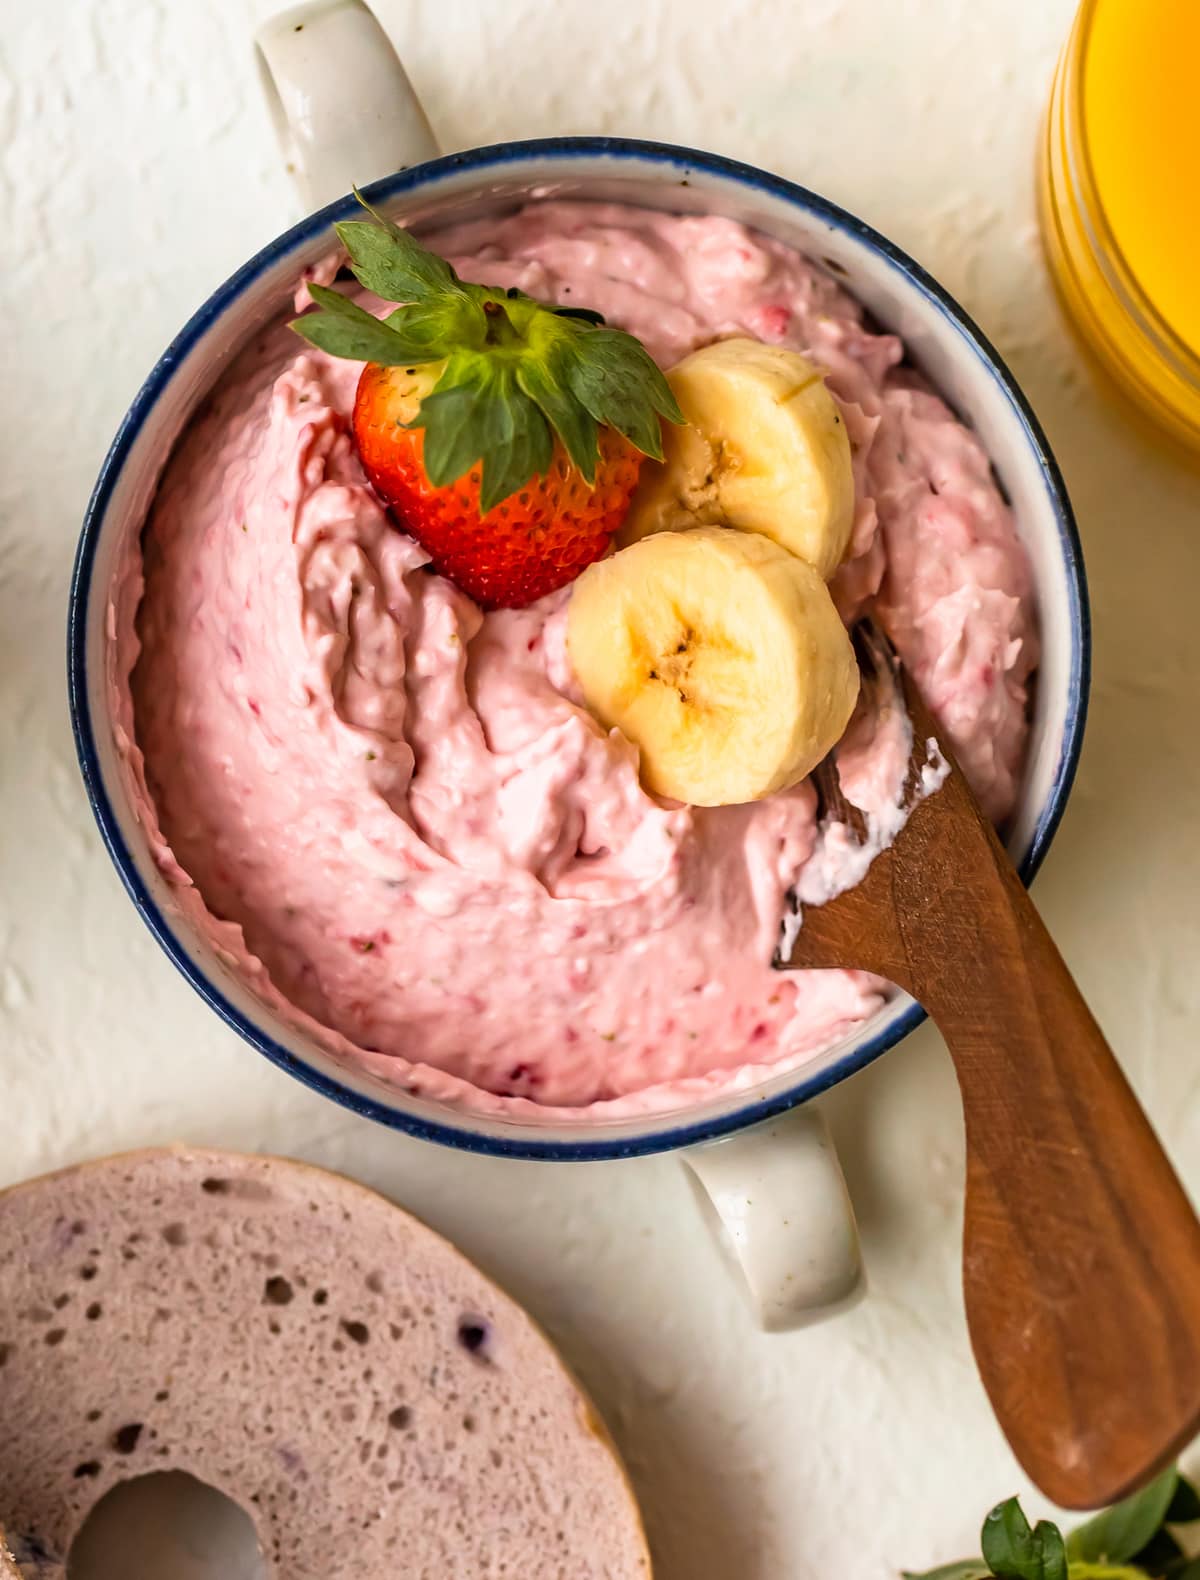 banana strawberry cream cheese in a serving dish